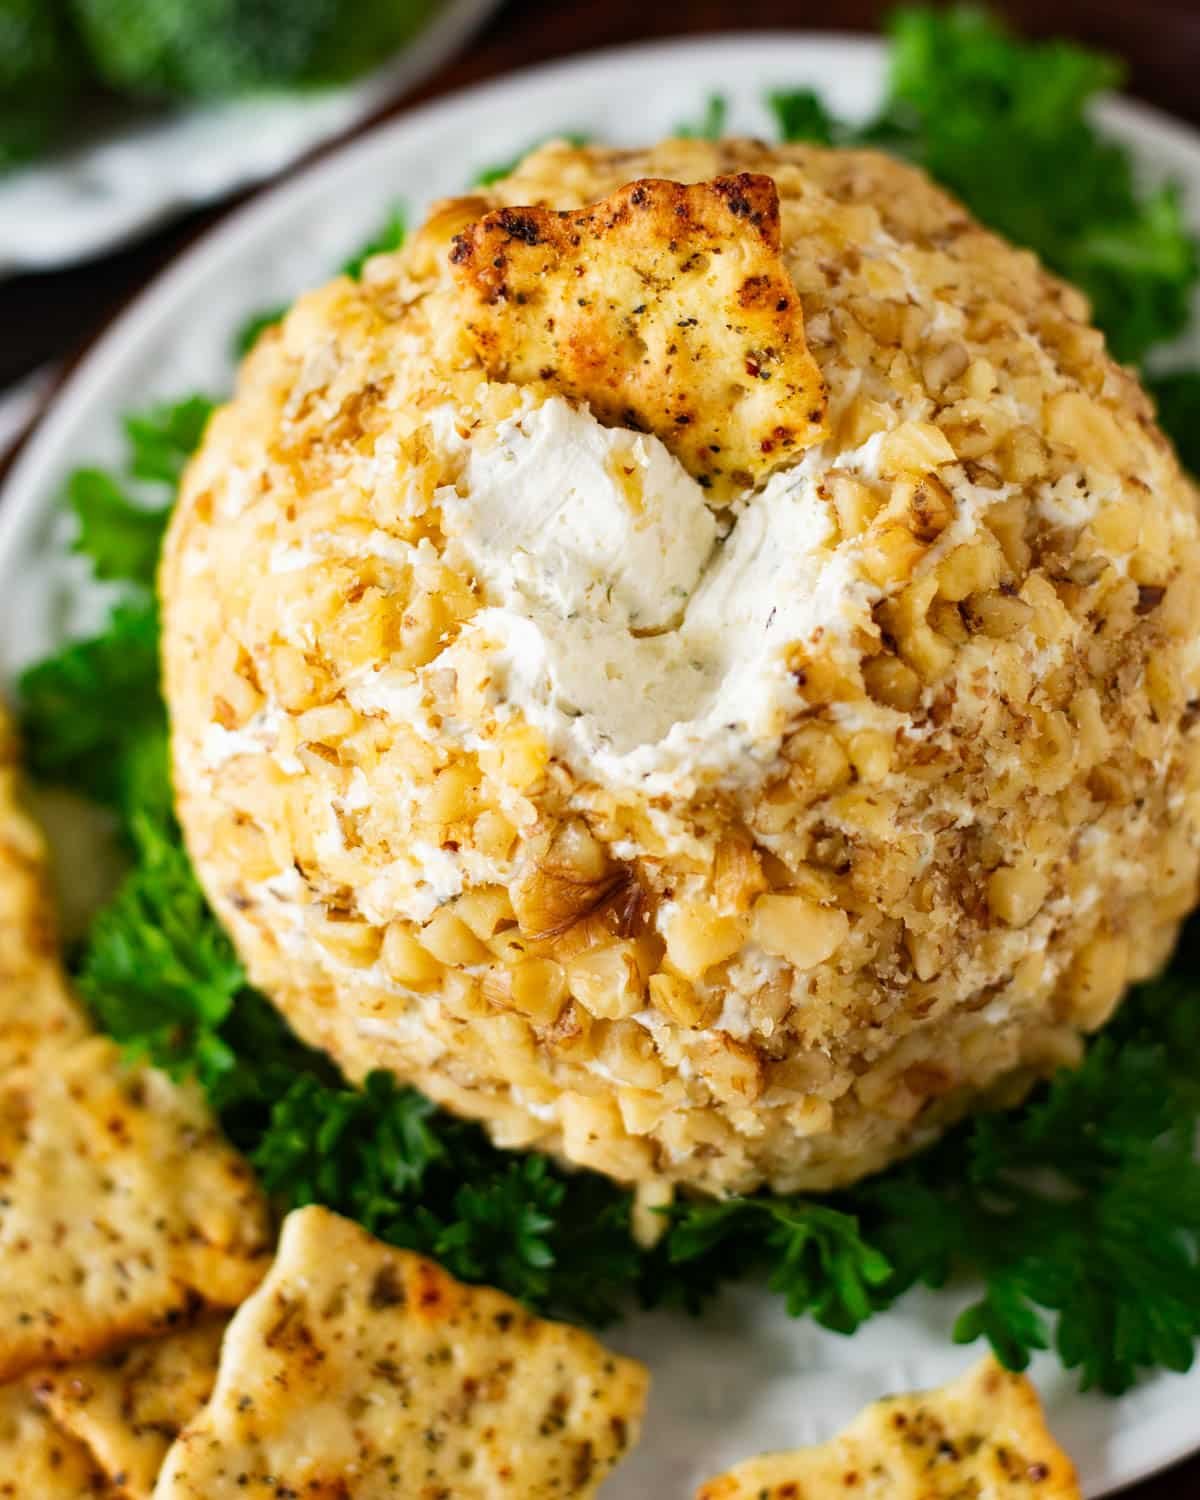 a cracker sitting on top of a garlic cheese ball